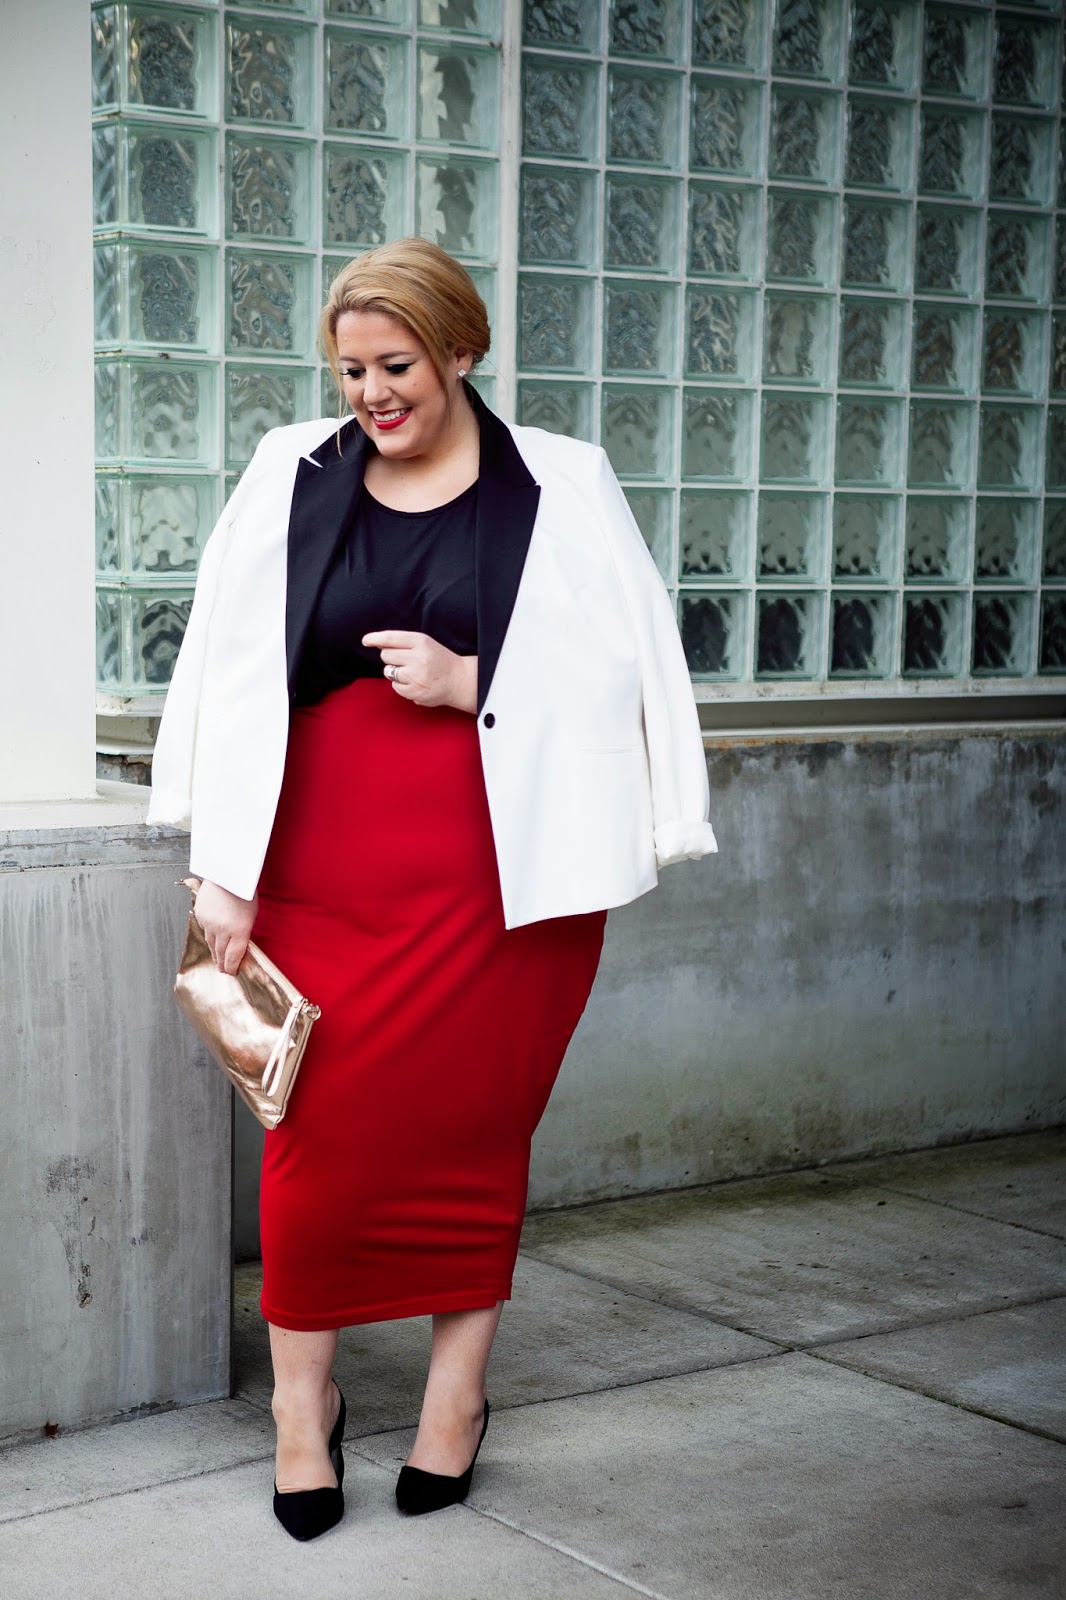 30PlusCurves 30 Something Style OOTD Featuring SimplyBe on a Size 26/28 Plus Size Fashion Blogger Body Jessica Kane